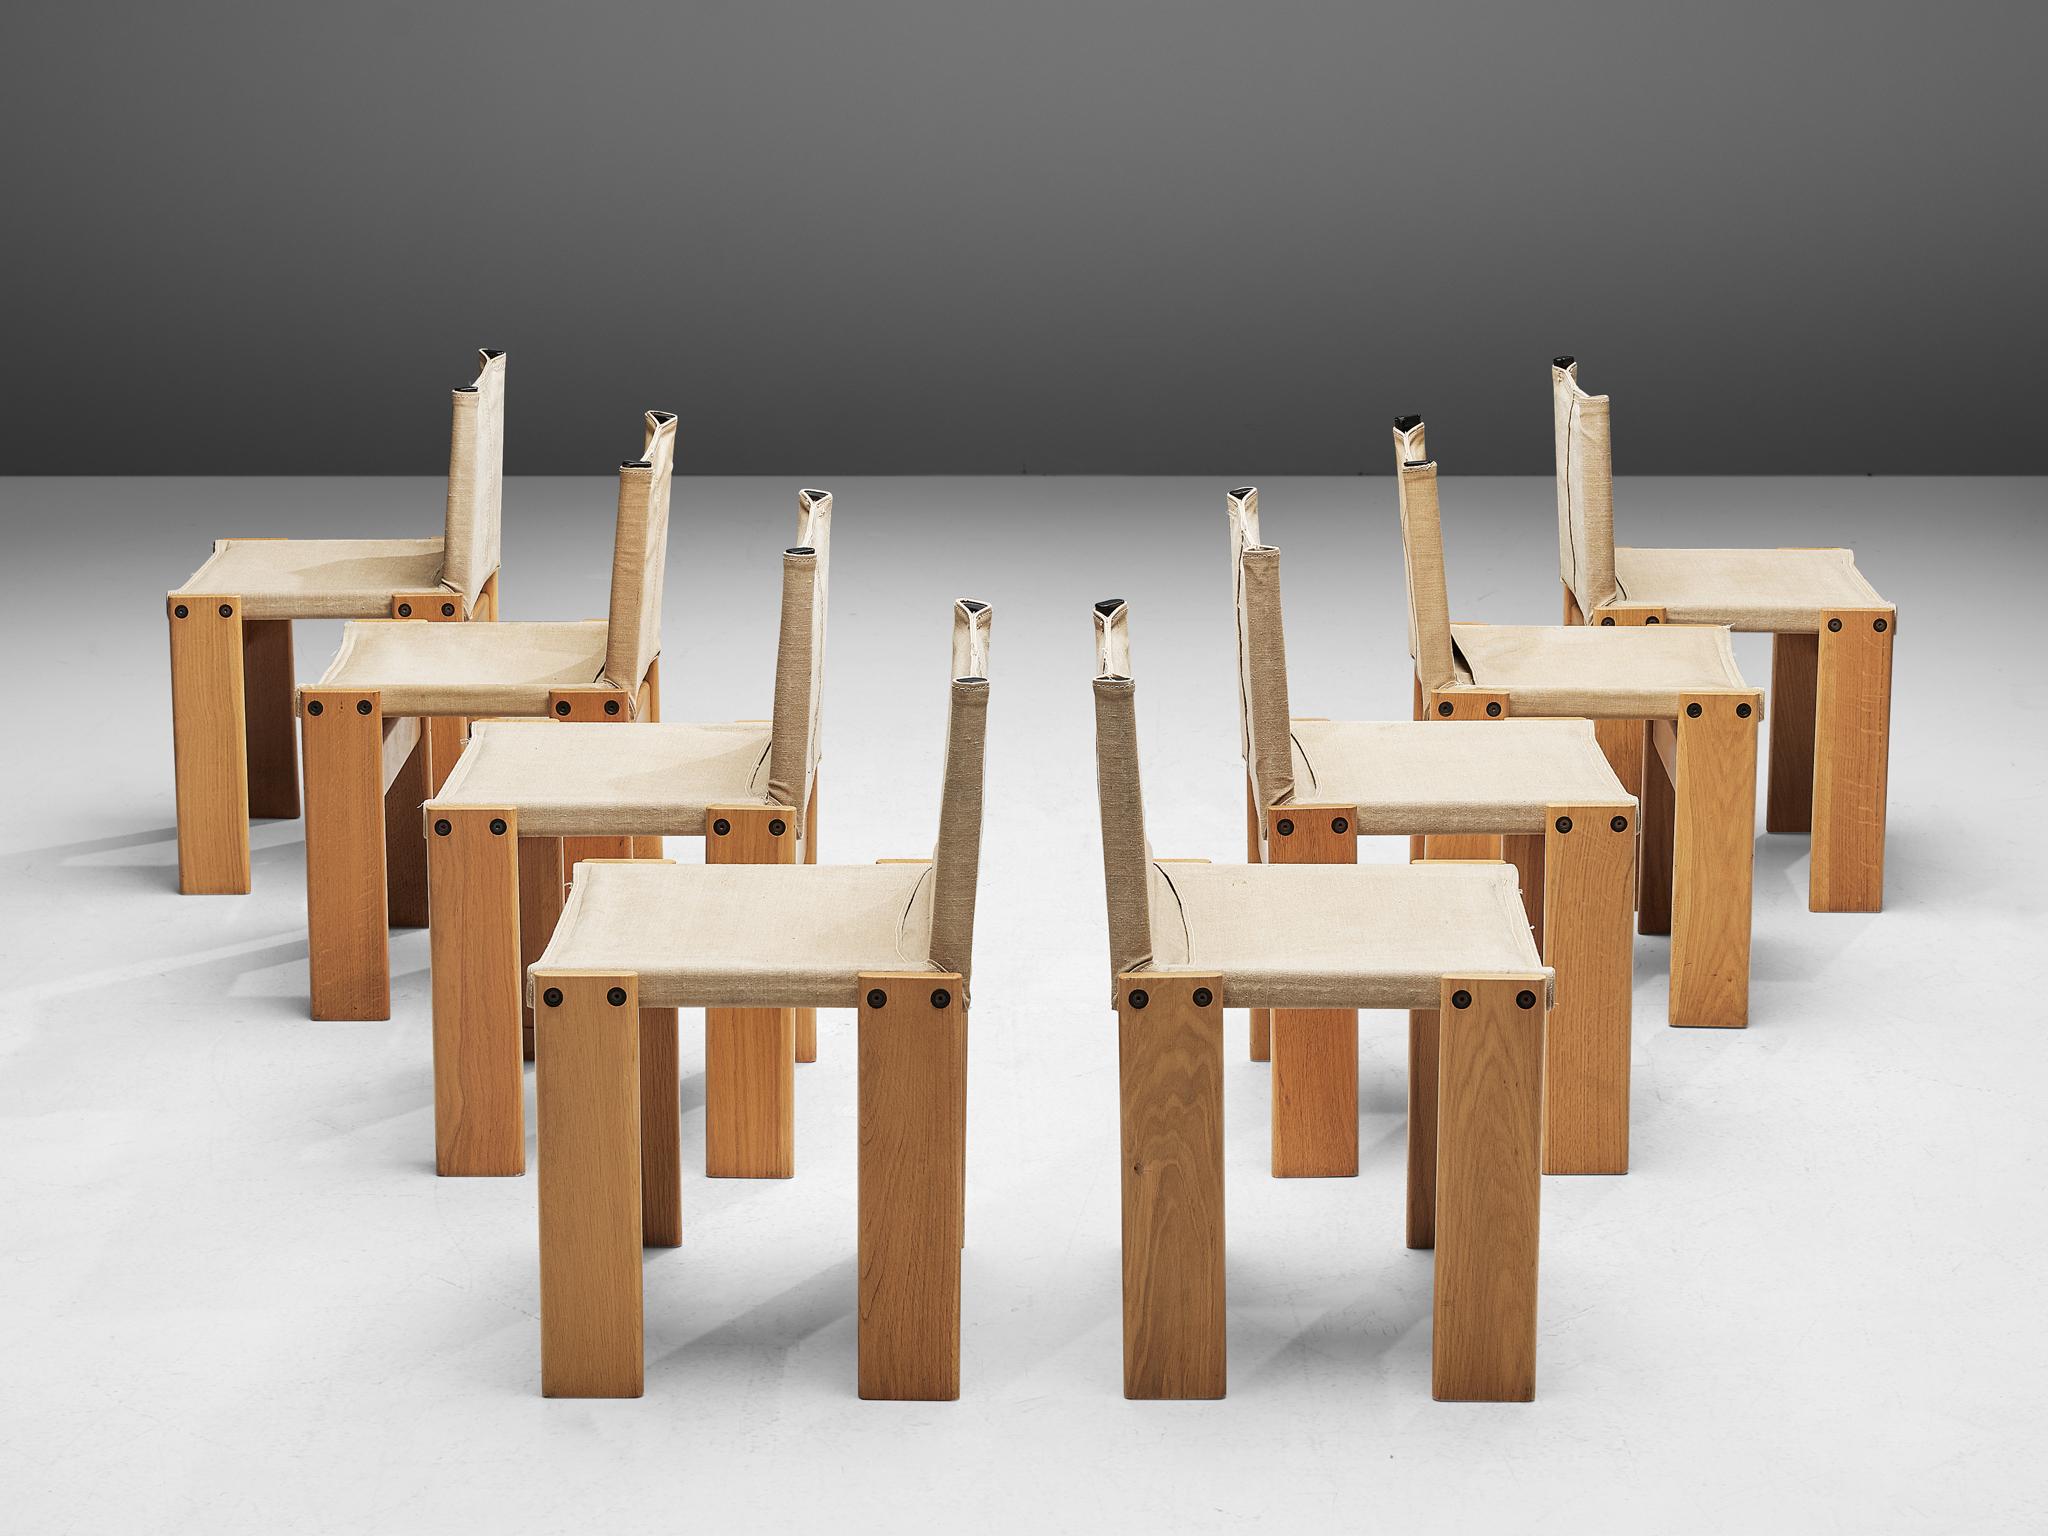 Afra & Tobia Scarpa for Molteni, set of eight 'Monk' chairs, oak and beige canvas, Italy, 1974.

The natural canvas forms a well-balanced combination with the oakwood. Interesting is the 'flat' shape of this chair where the designer has chosen to